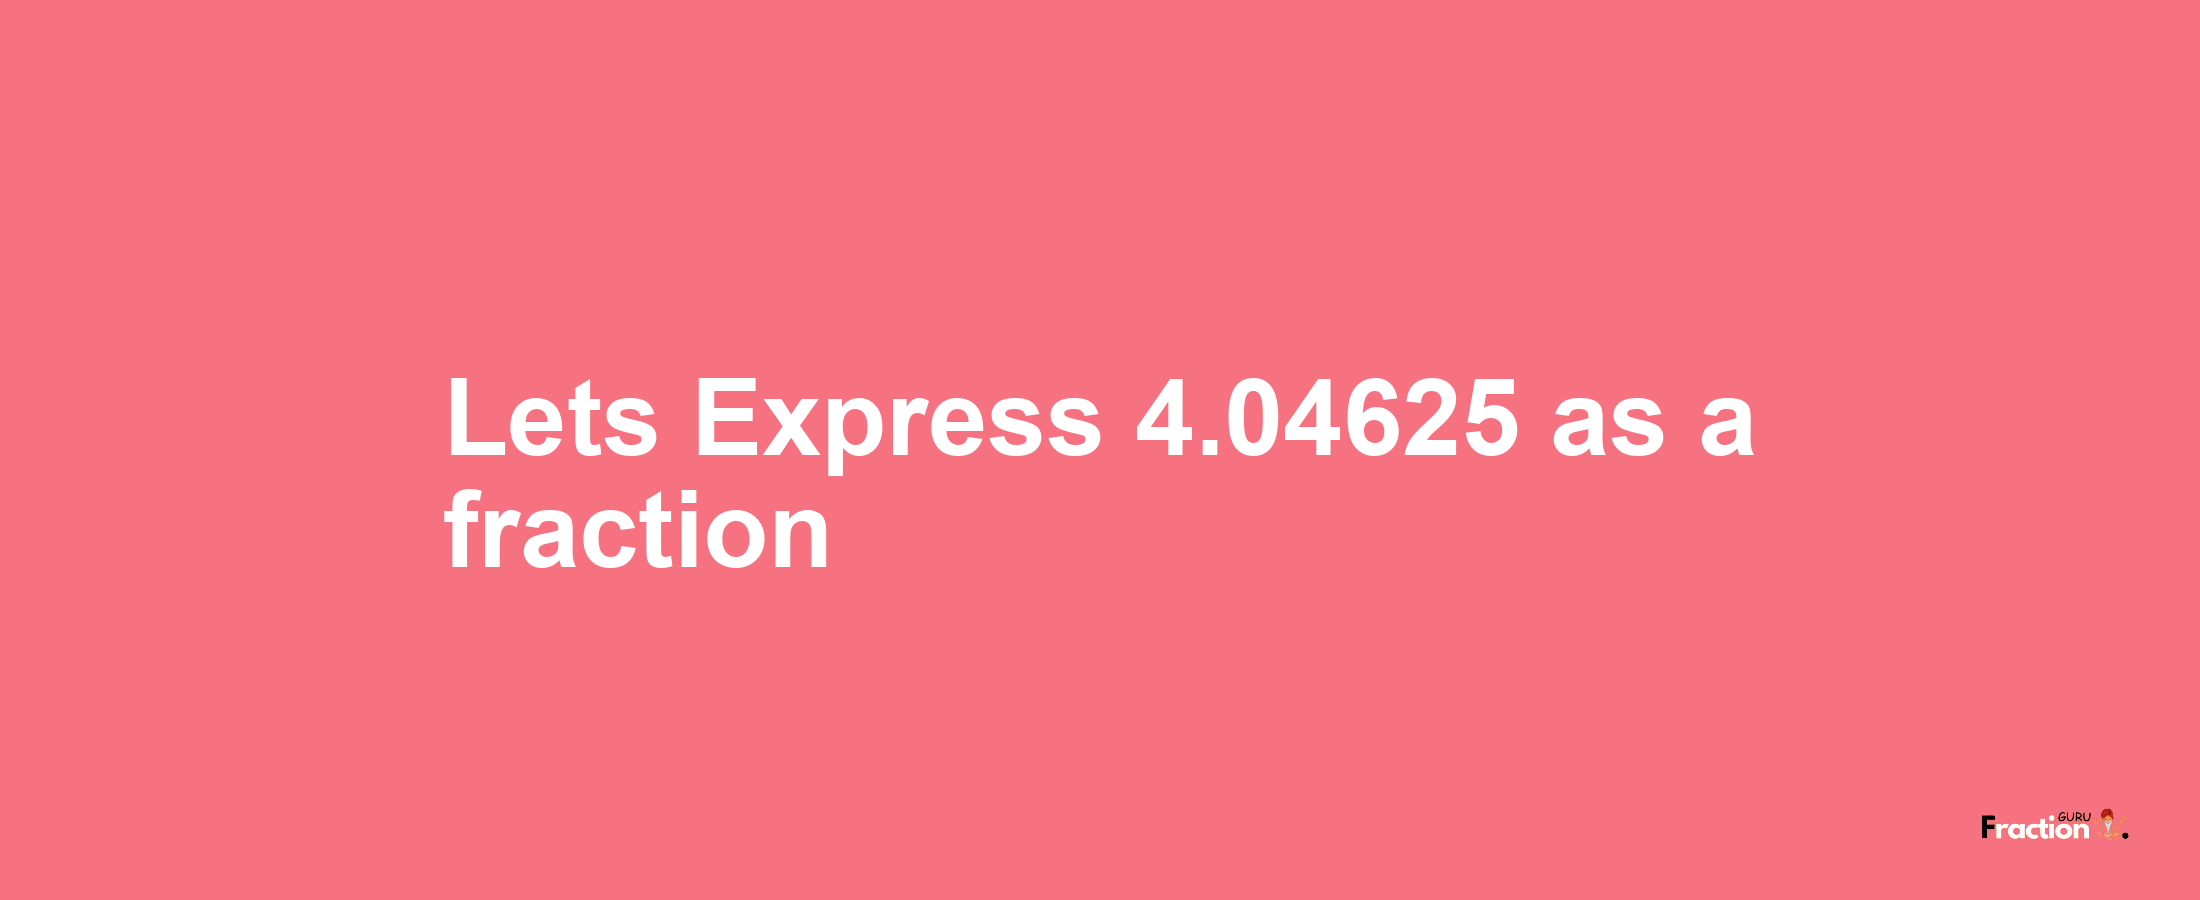 Lets Express 4.04625 as afraction